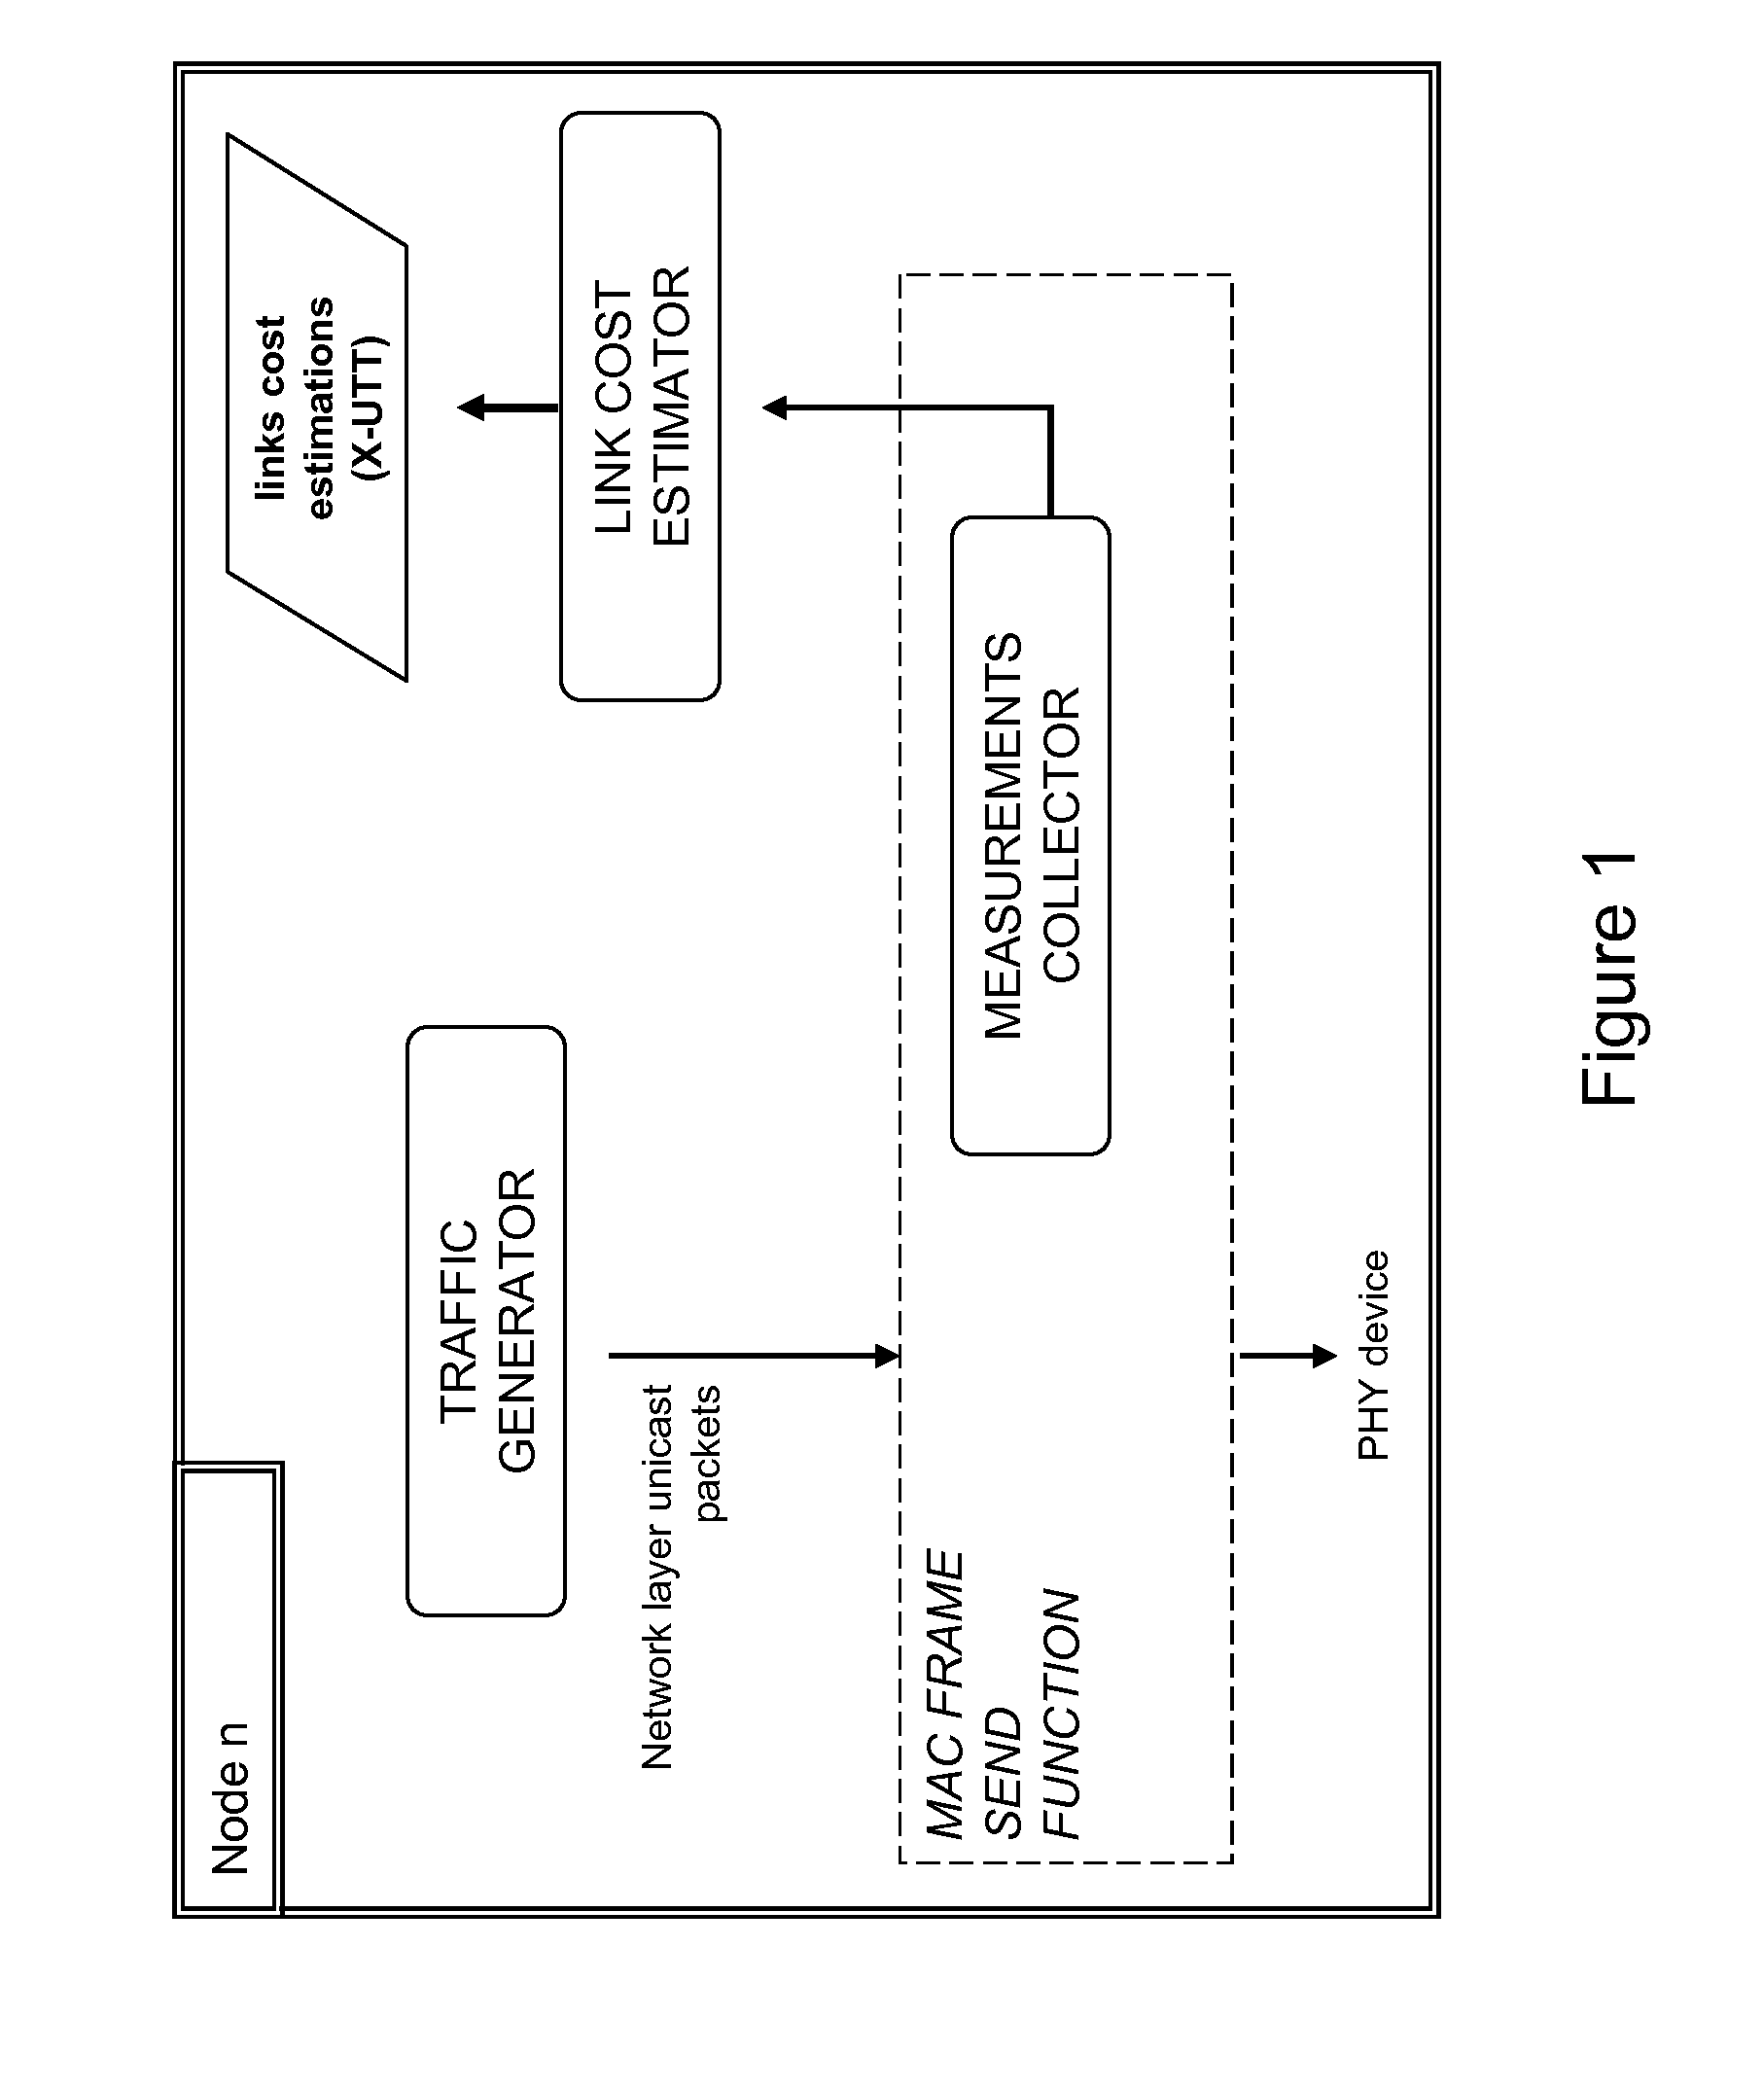 Method for characterizing a communication link in a communication network